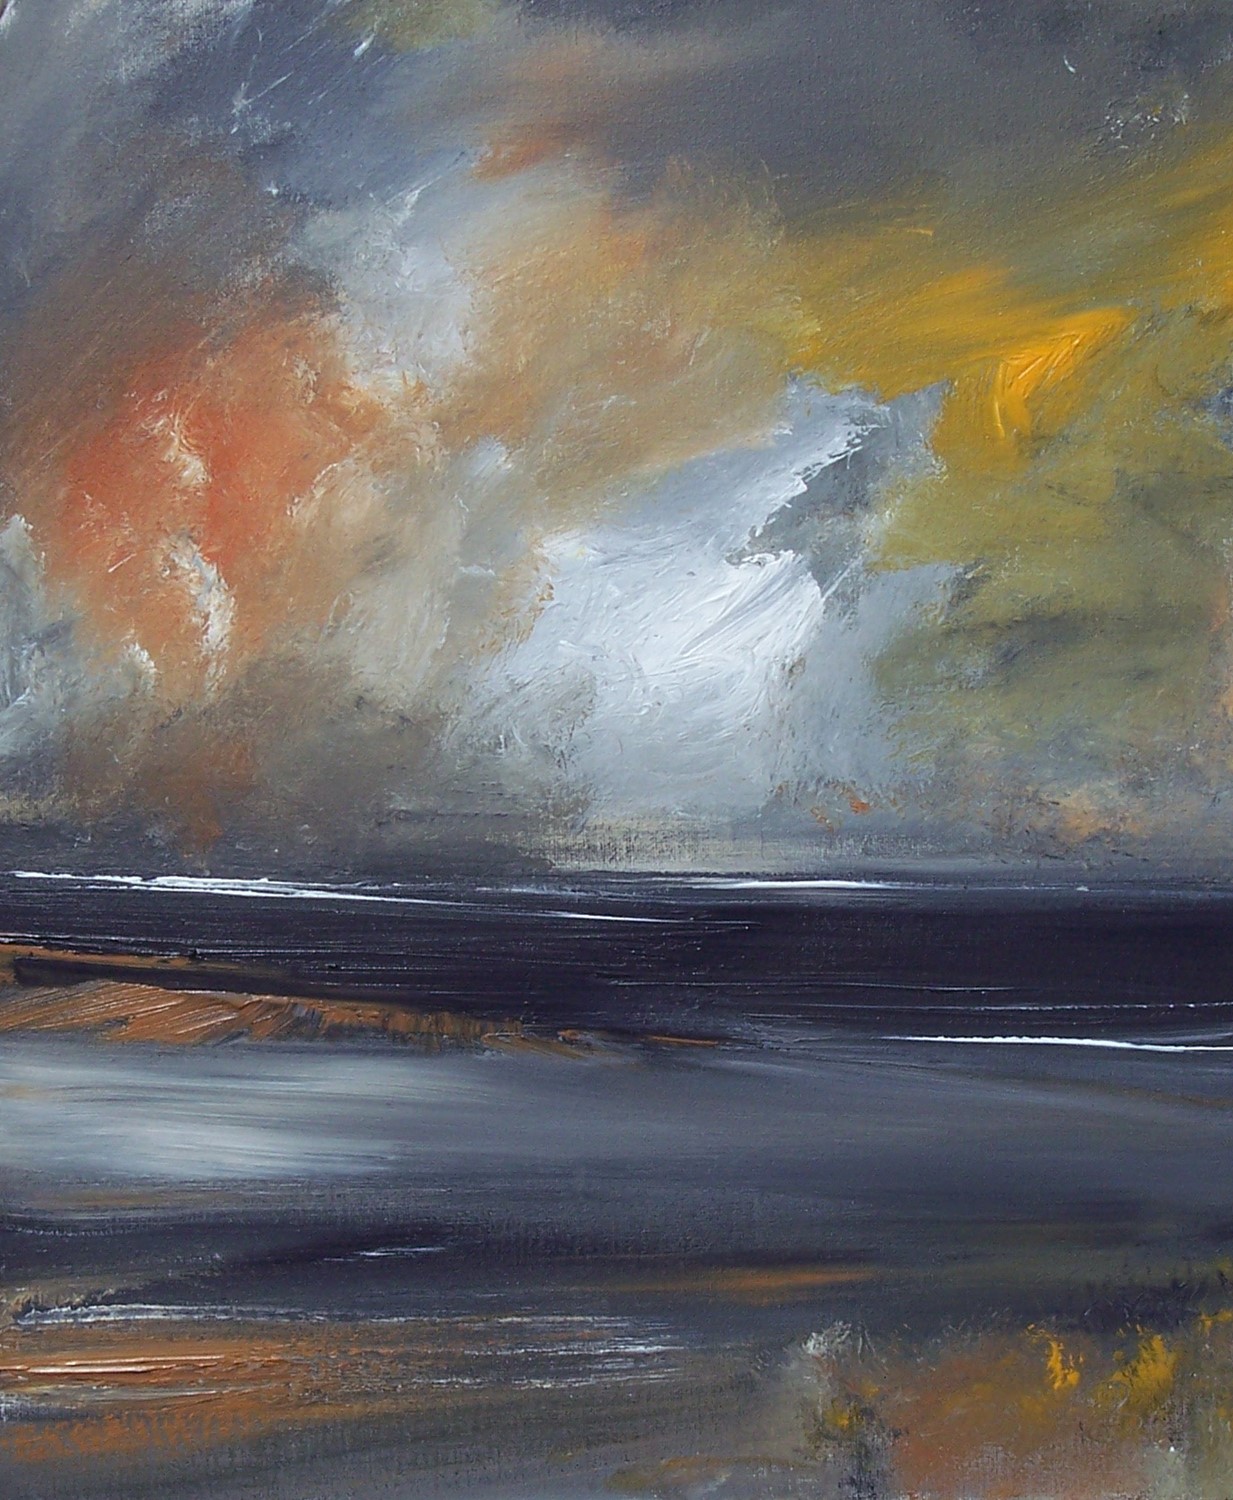 'Brooding storms' by artist Rosanne Barr